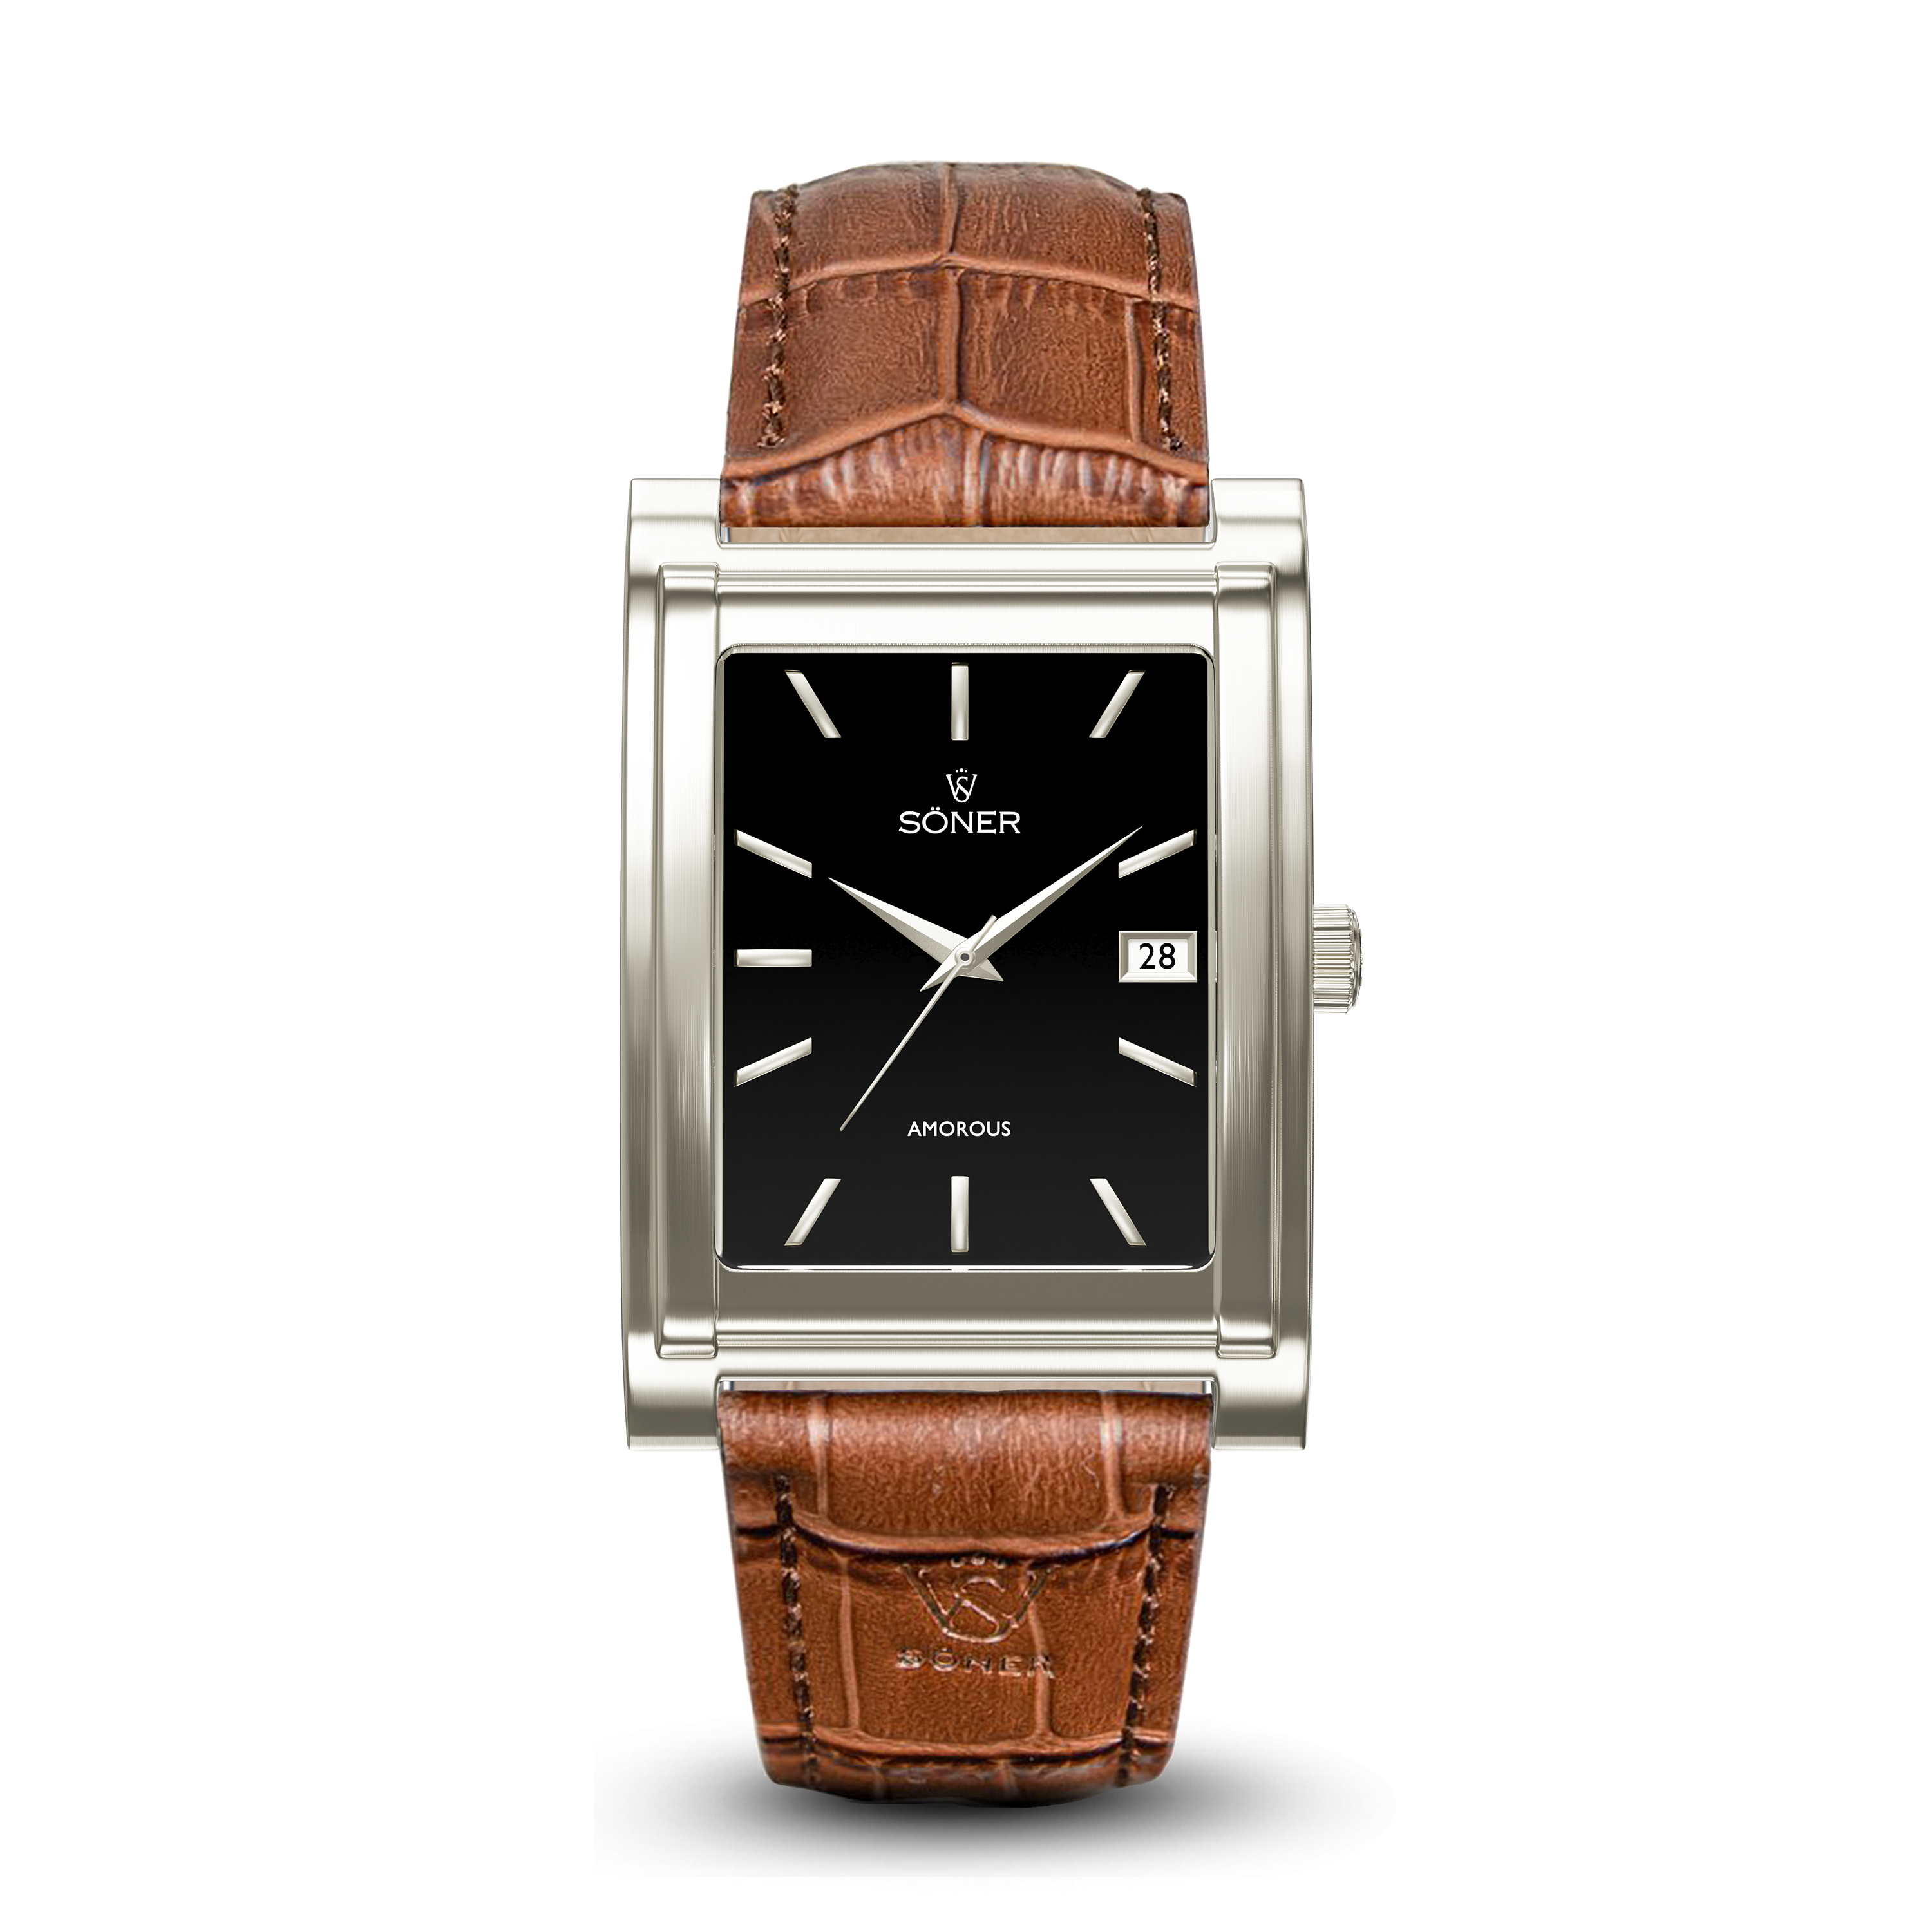 Square automatic watch, Amorous Sydney with black dial - brown alligator pattern leather strap front view